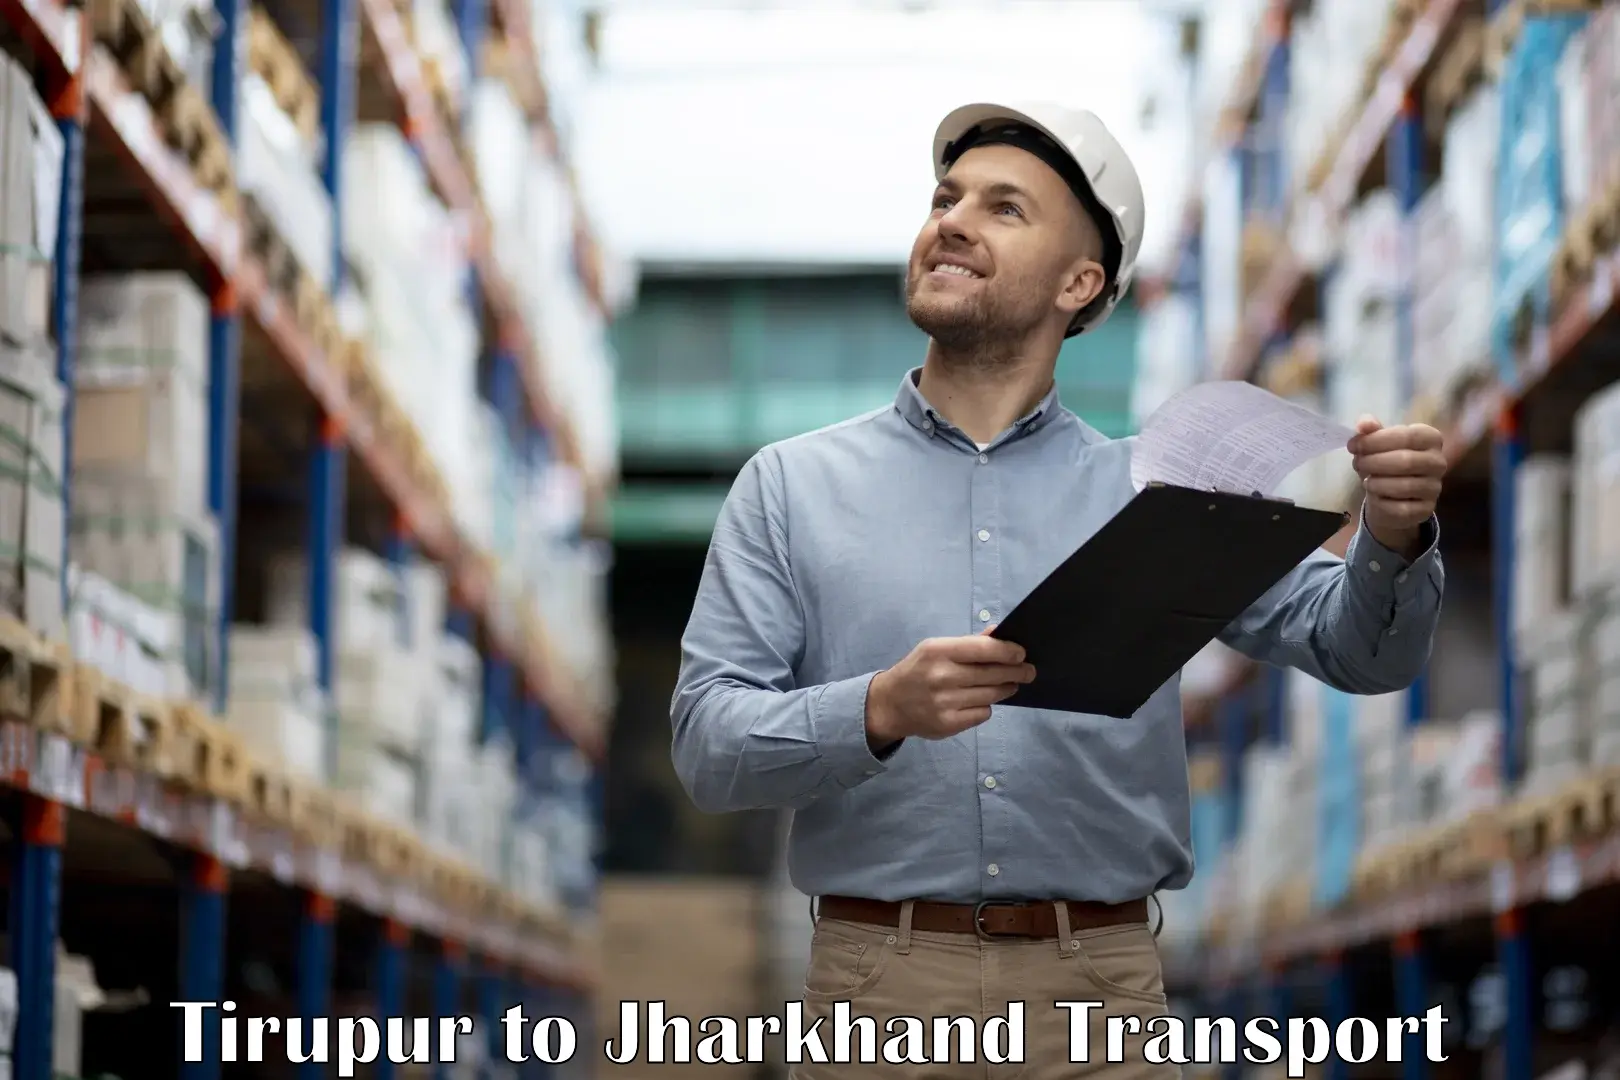 Container transport service Tirupur to Jharkhand